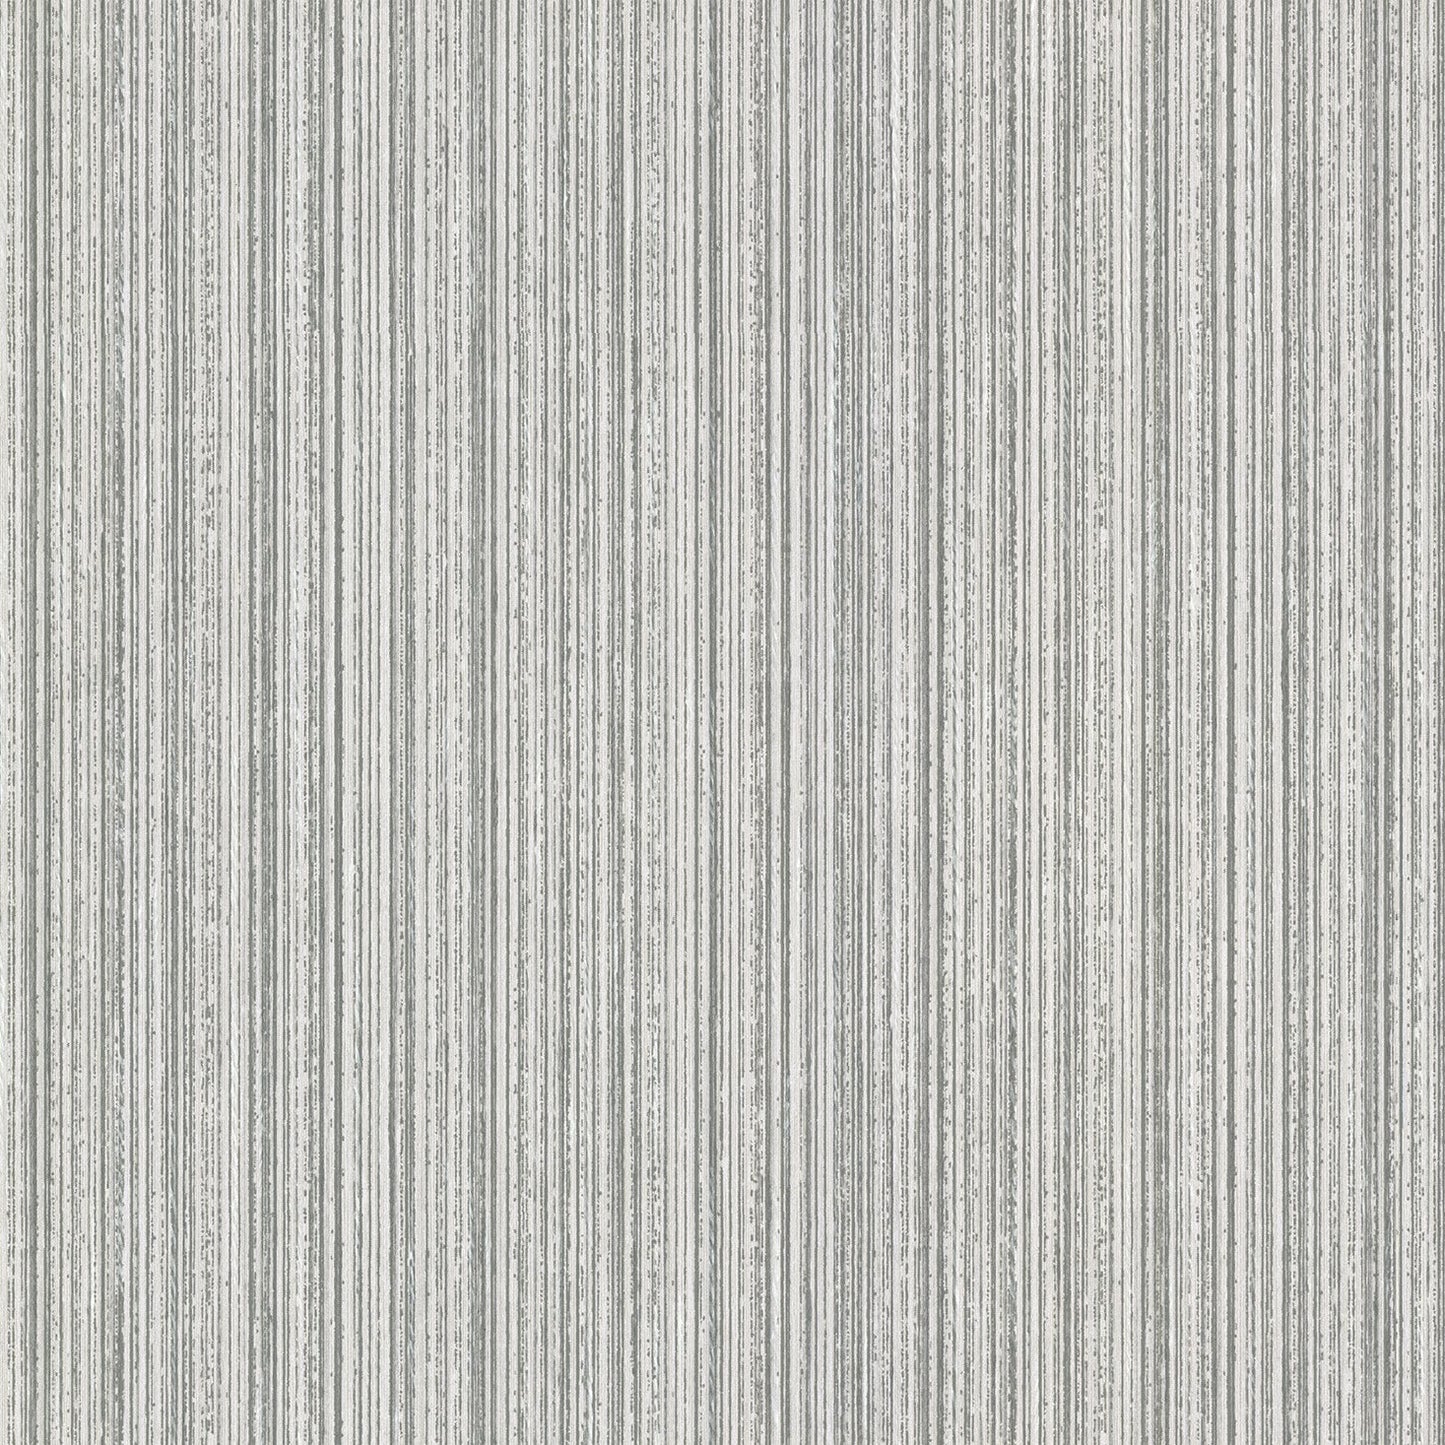 Acquire 2767-23781 Salois Light Grey Texture Techniques & Finishes III Brewster